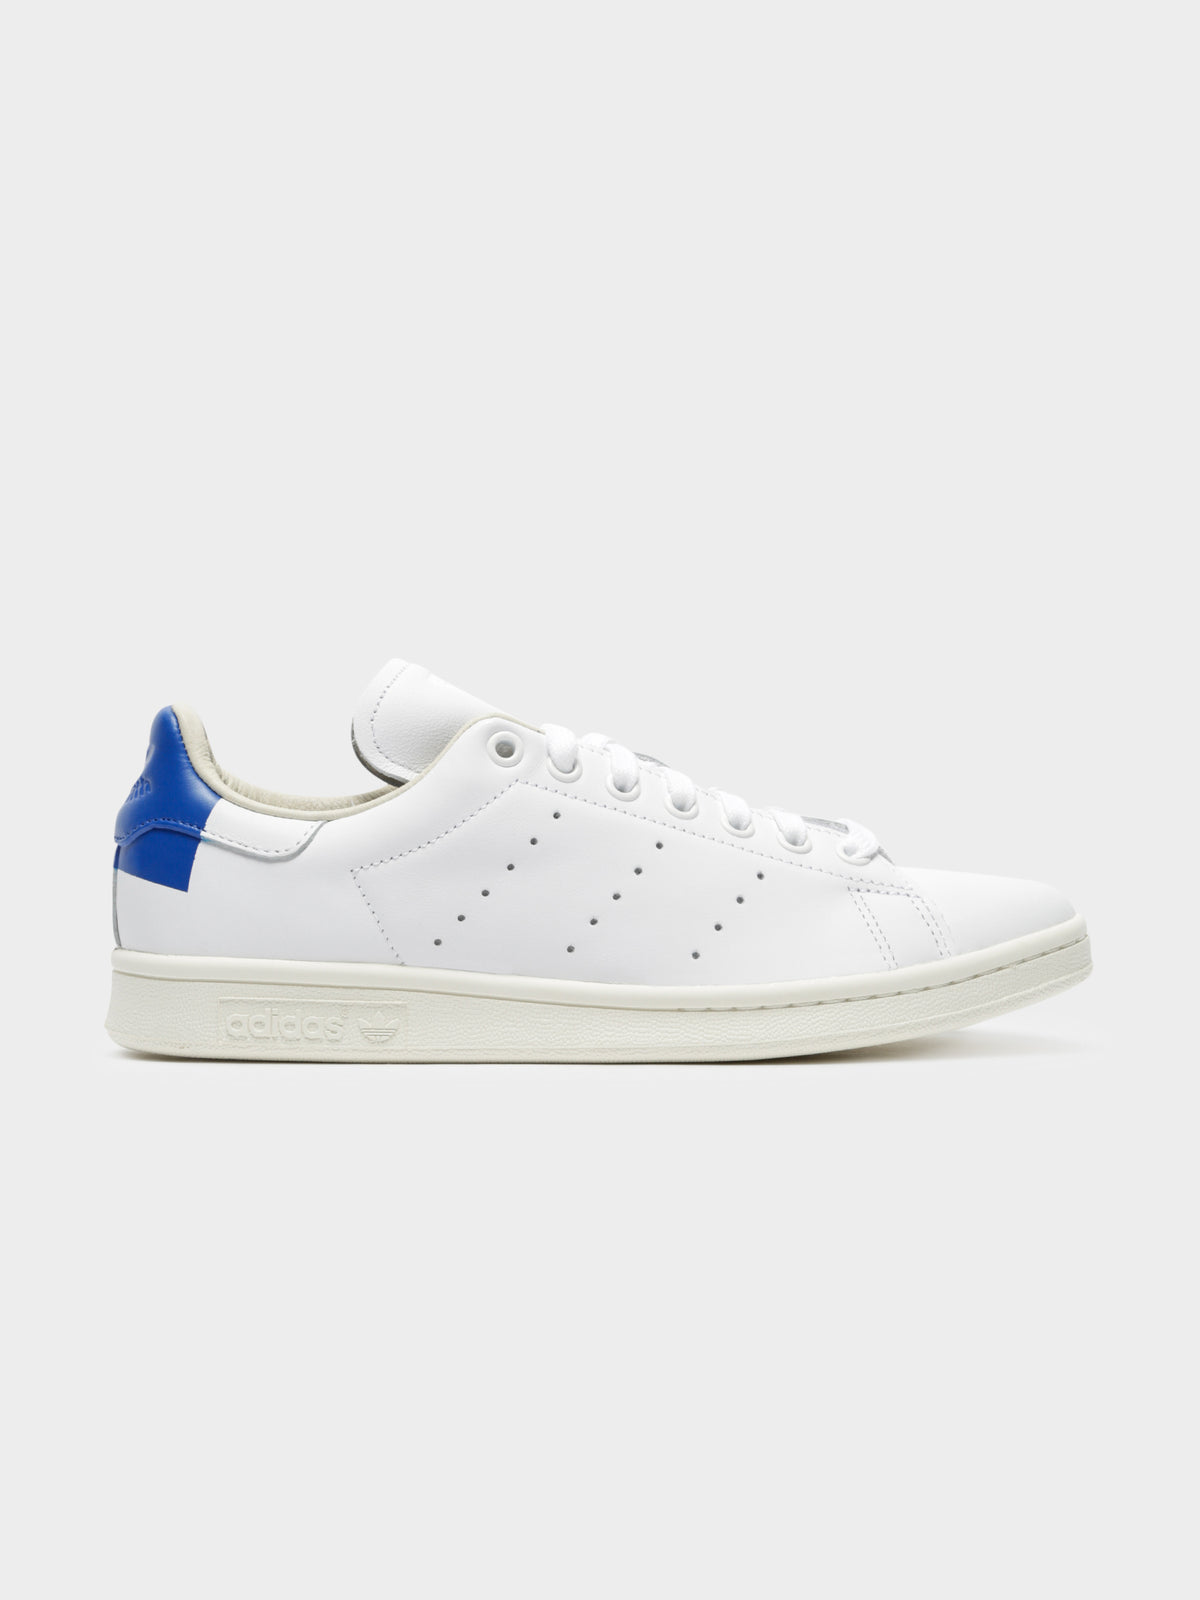 Unisex Stan Smith Sneakers in White &amp; Collegiate Royal Blue